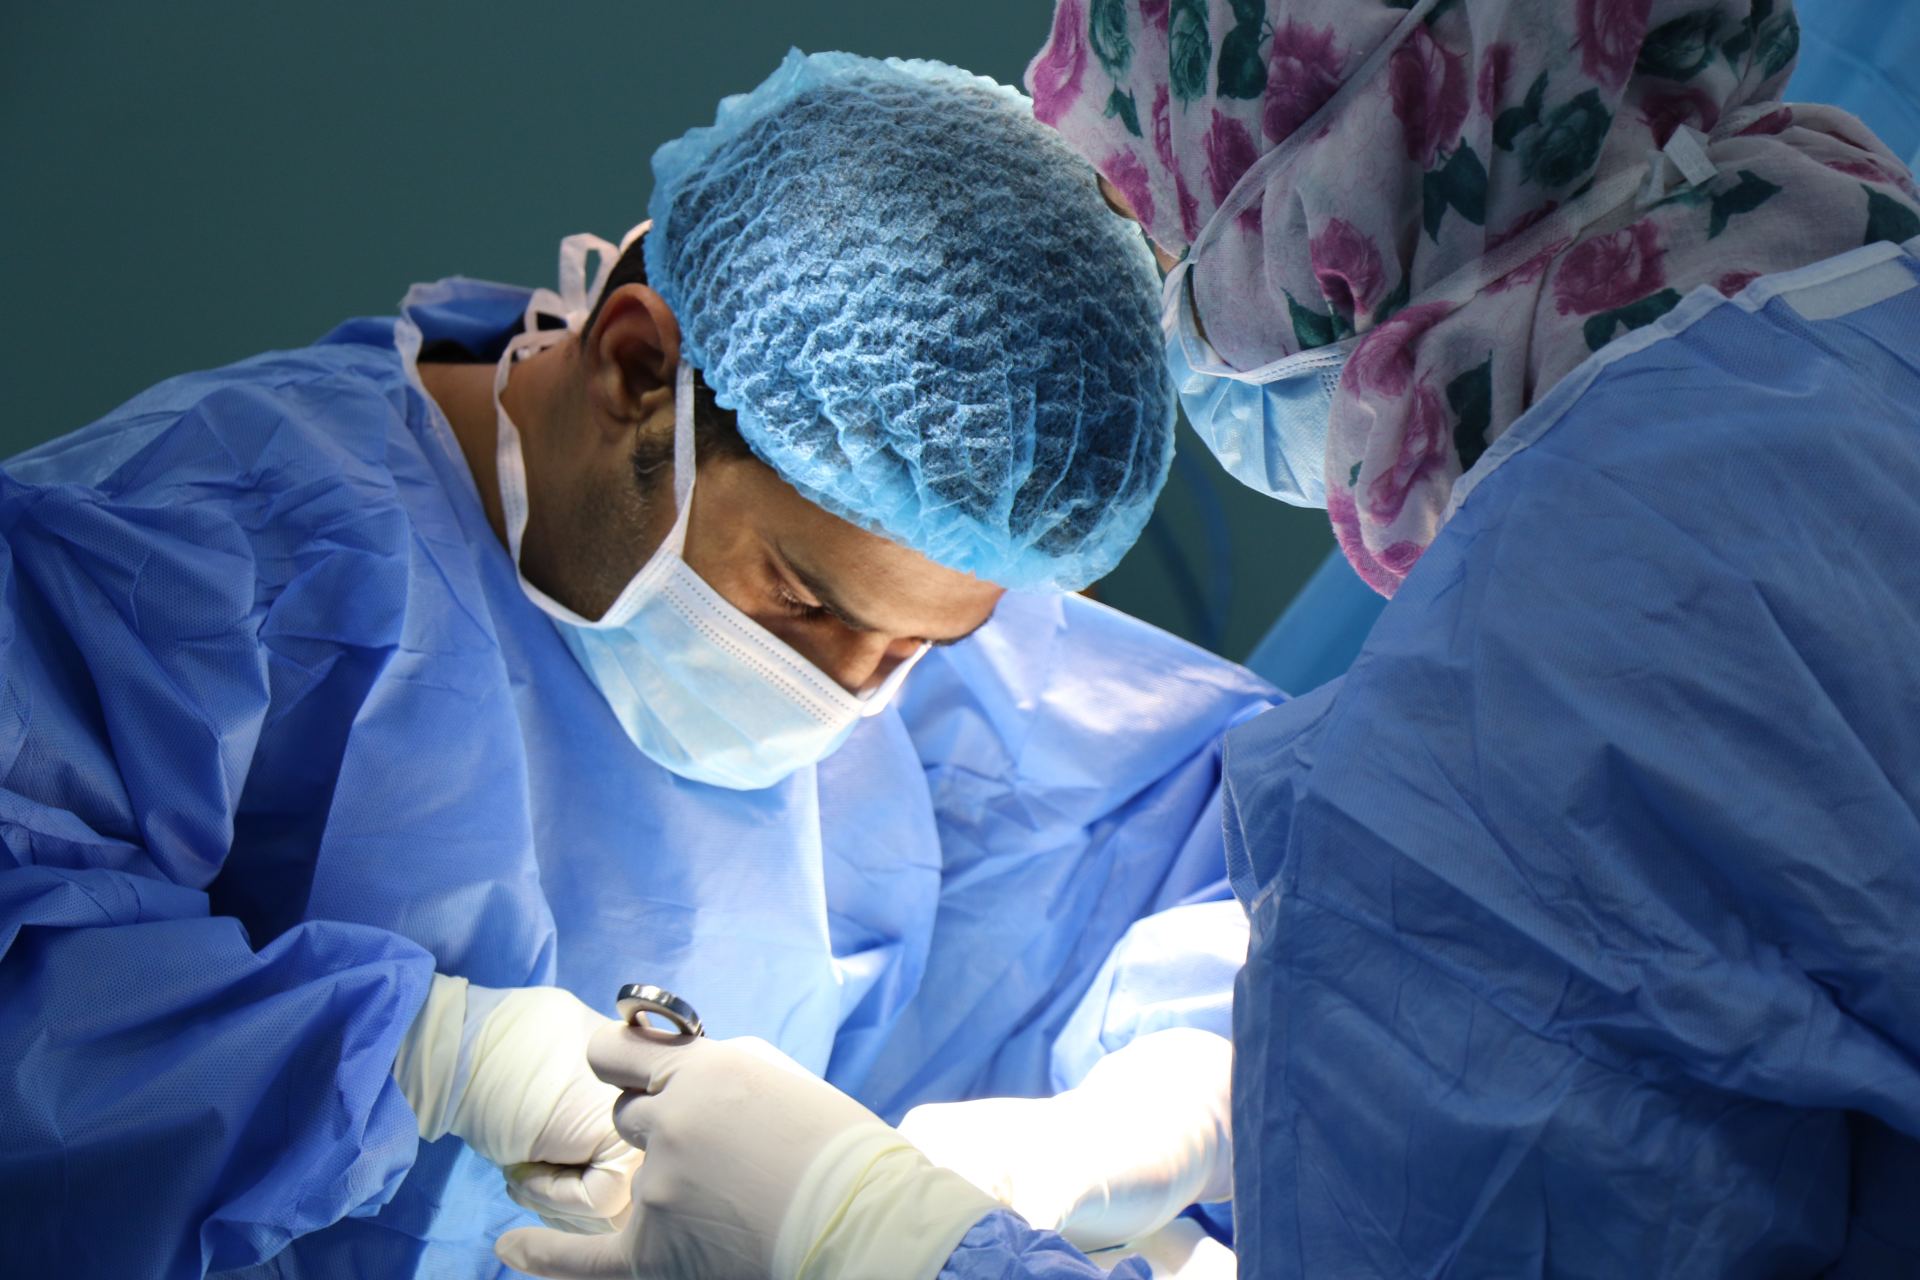 A doctor performing a surgery